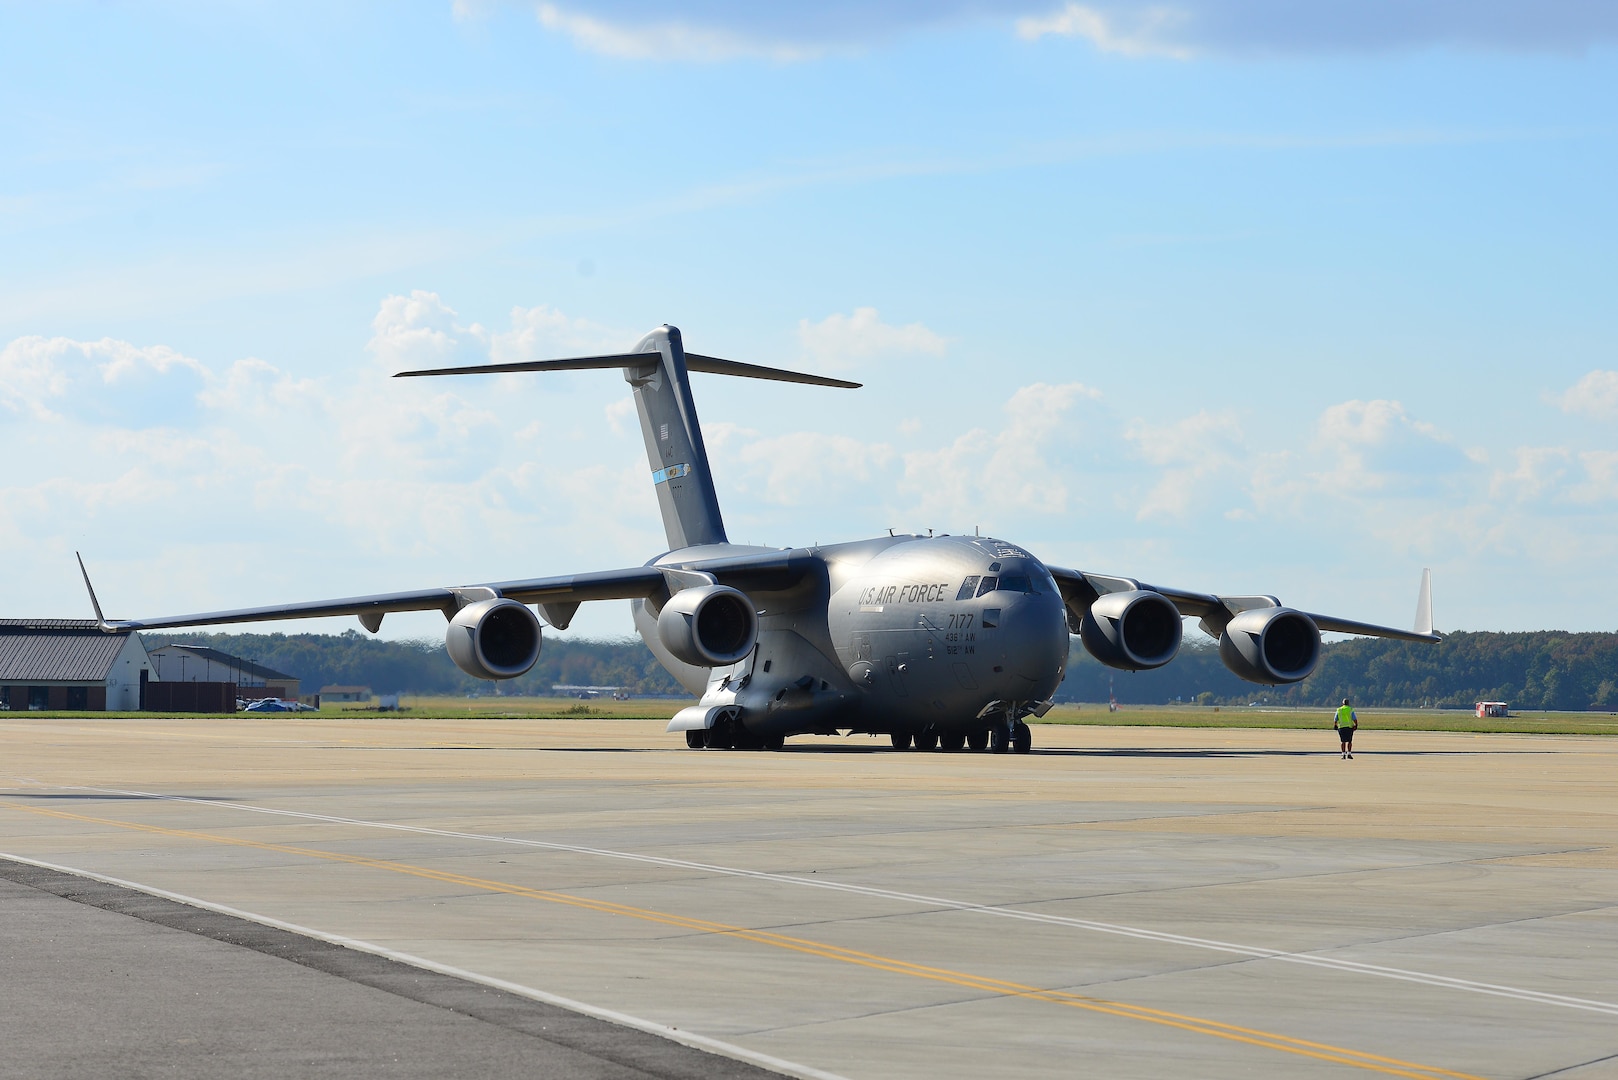 A U.S. Air Force C-17 Globemaster III brings about 20 members of the 689th Rapid Port Opening Element home from Haiti at Joint Base Langley-Eustis, Va., Oct. 20, 2016. The RPOEs are the U.S. Army’s main component for both the Seaport of Debarkation and Airport of Debarkation of the United States Transportation Command’s Joint Task Force-Port Openings mission. (U.S. Air Force photo by Airman 1st Class Tristan Biese)